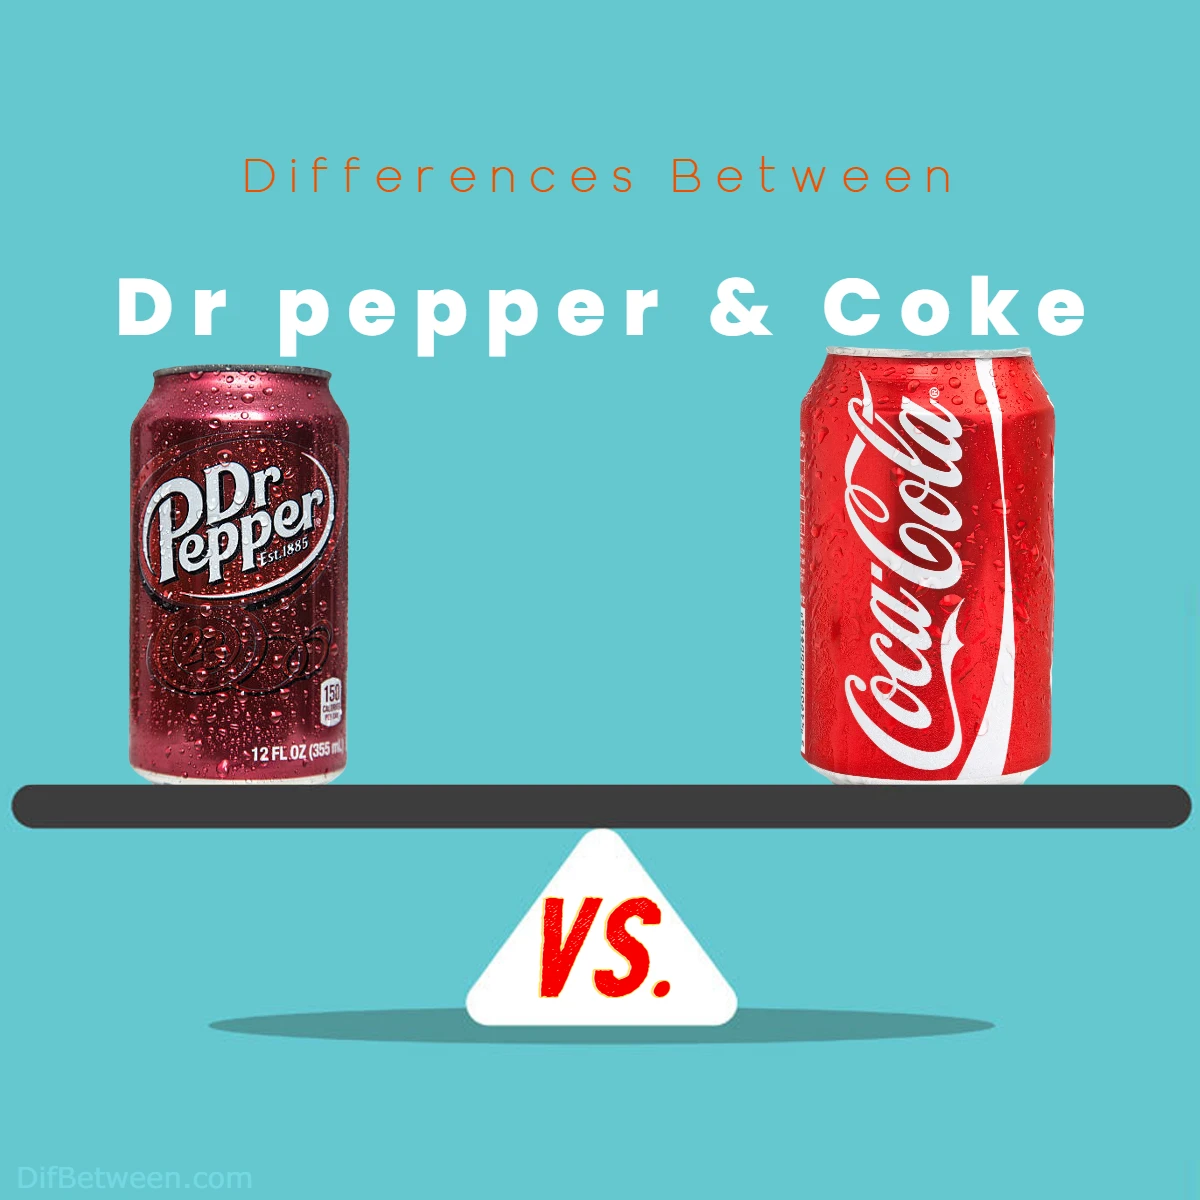 Differences Between Coca Cola and Dr pepper